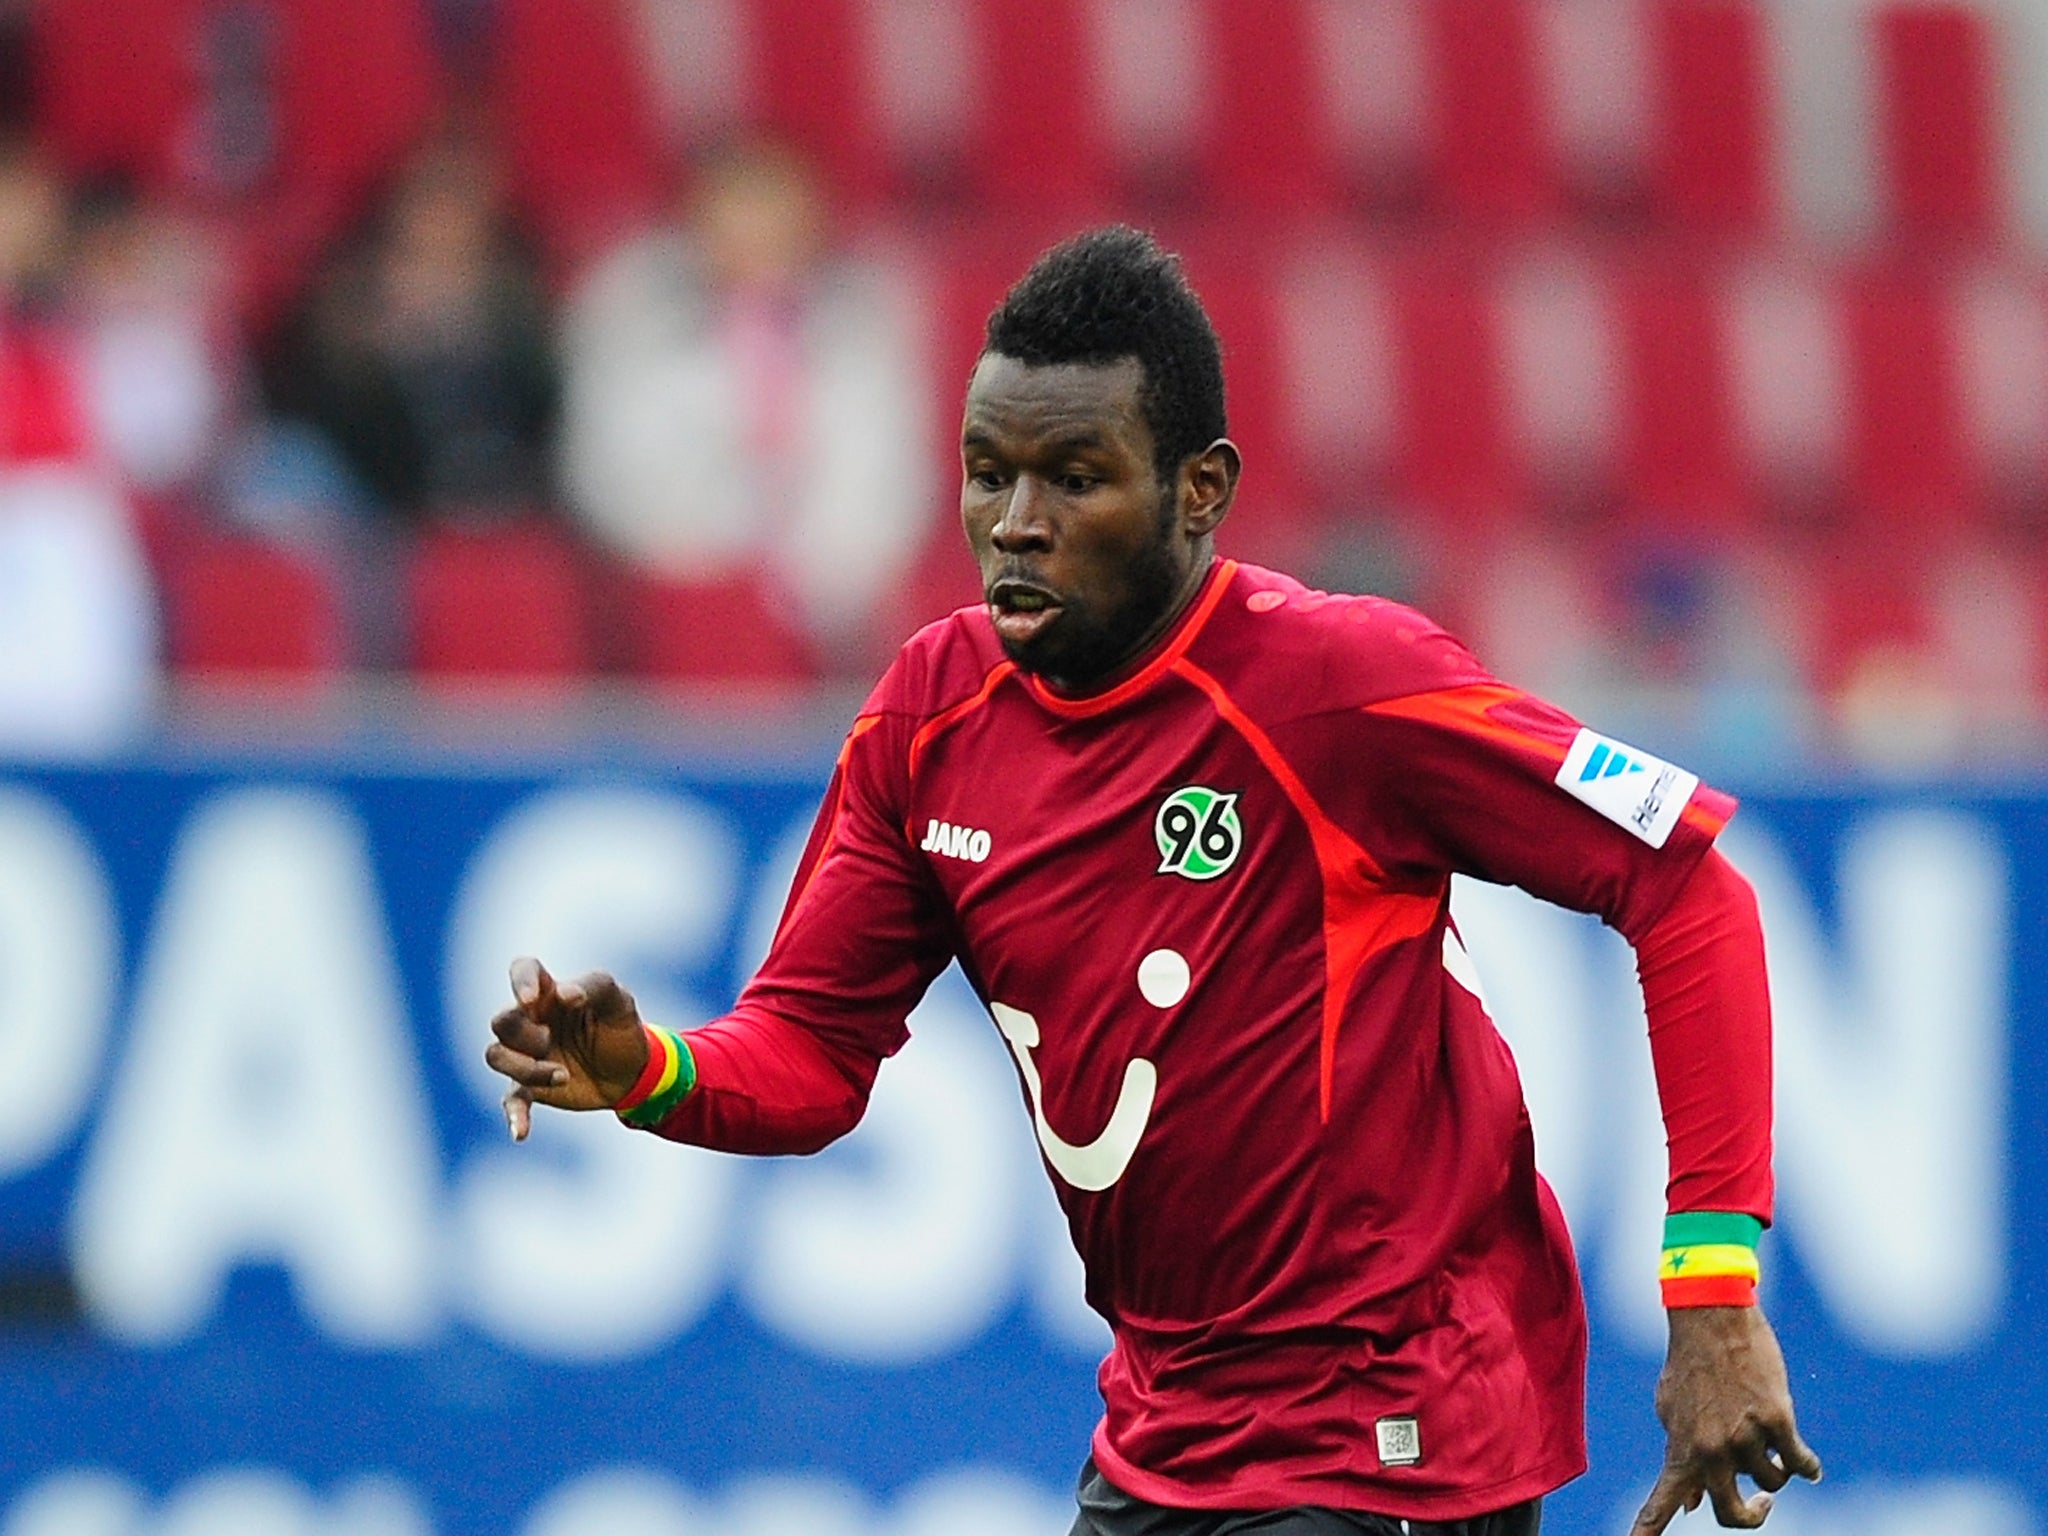 Mame Diouf of Hannover in action during the Bundesliga match between FC Augsburg and Hannover 96